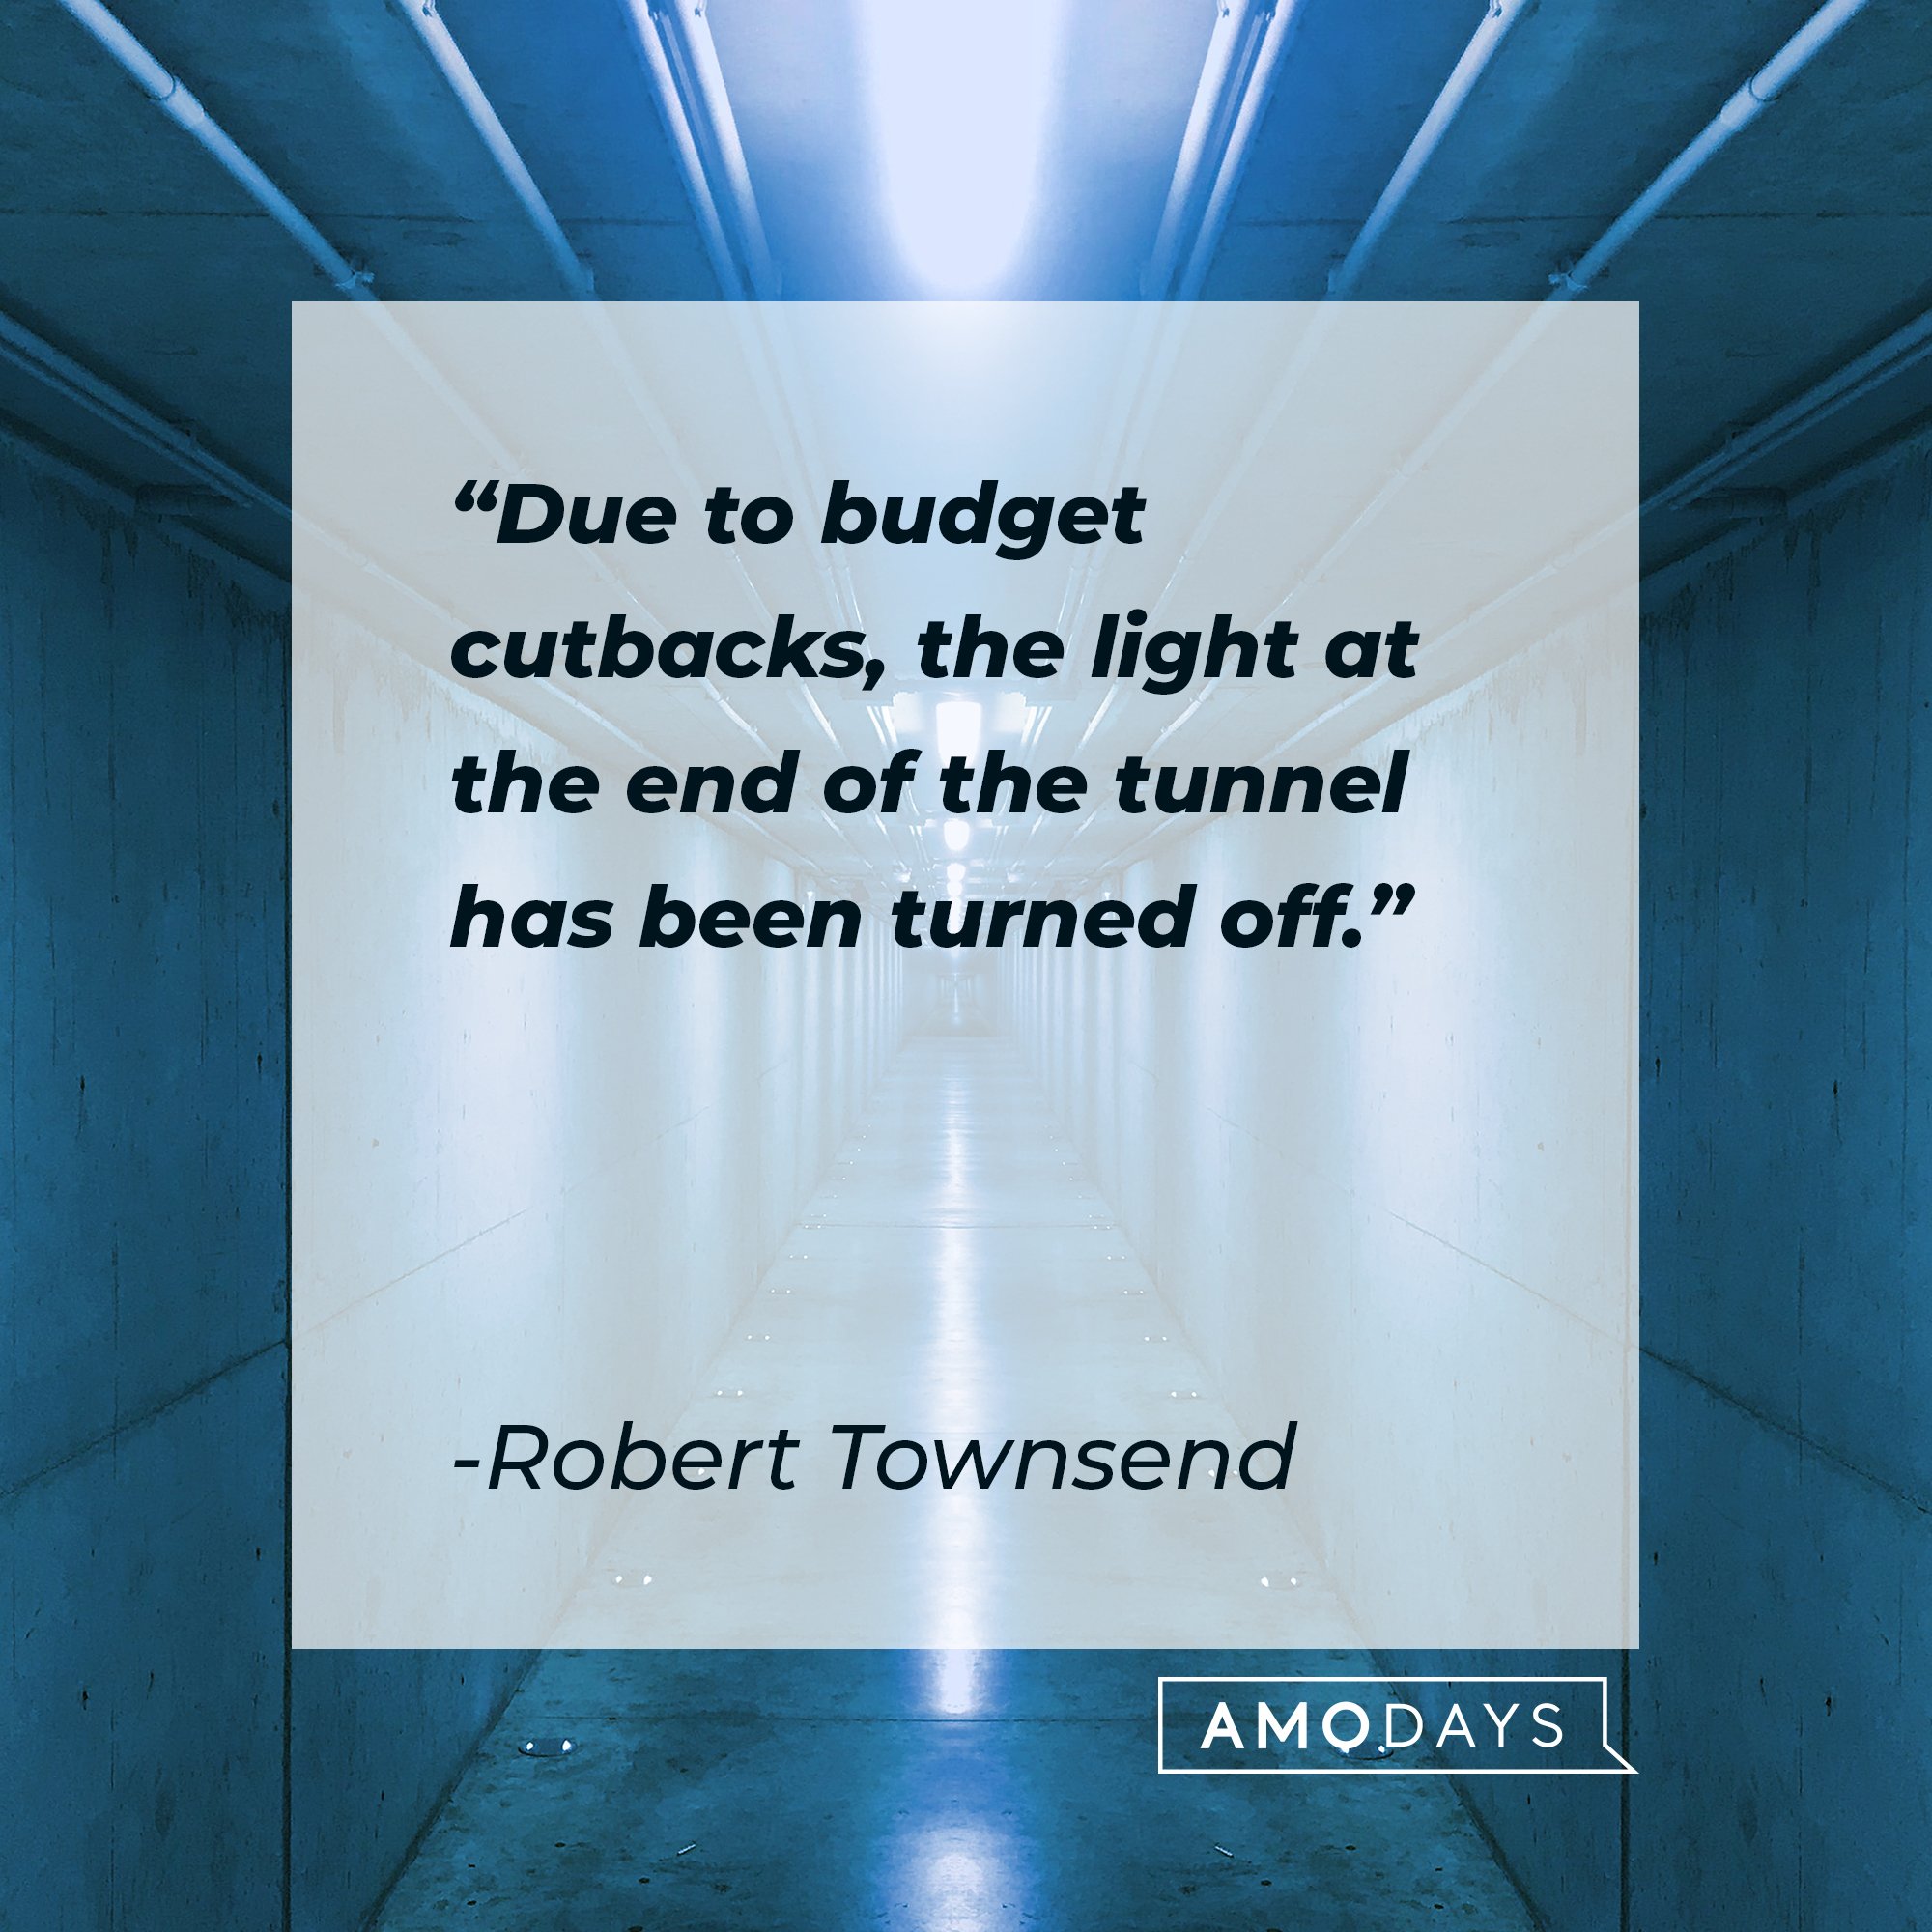 Robert Townsend’s quote: "Due to budget cutbacks, the light at the end of the tunnel has been turned off." | Image: AmoDays